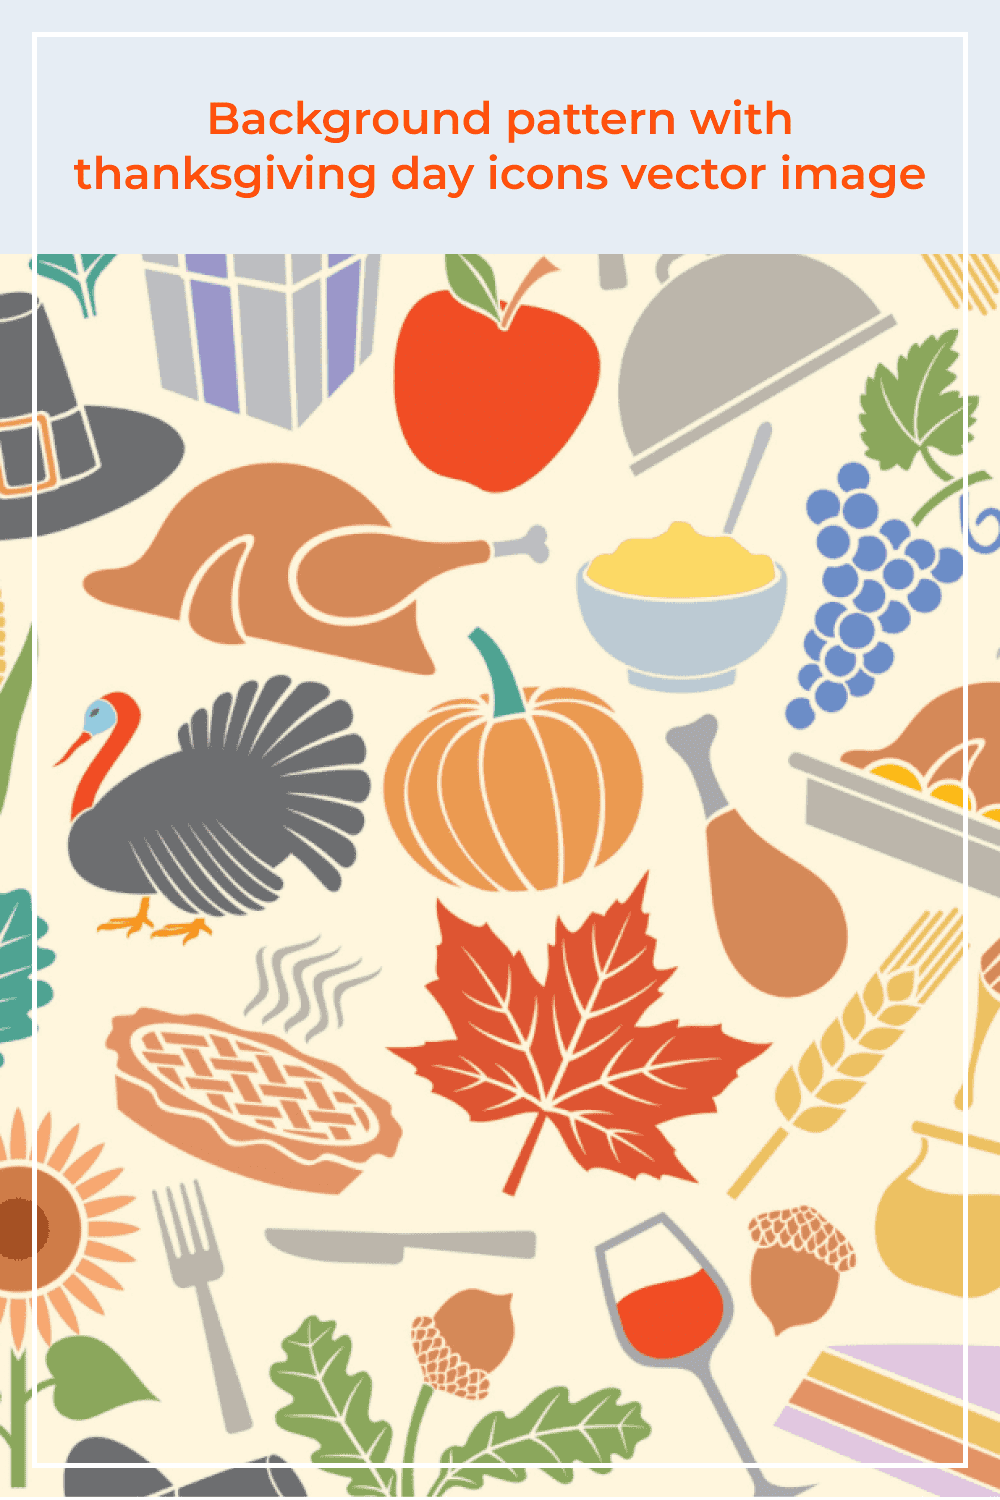 Background pattern with thanksgiving day icons vector image.